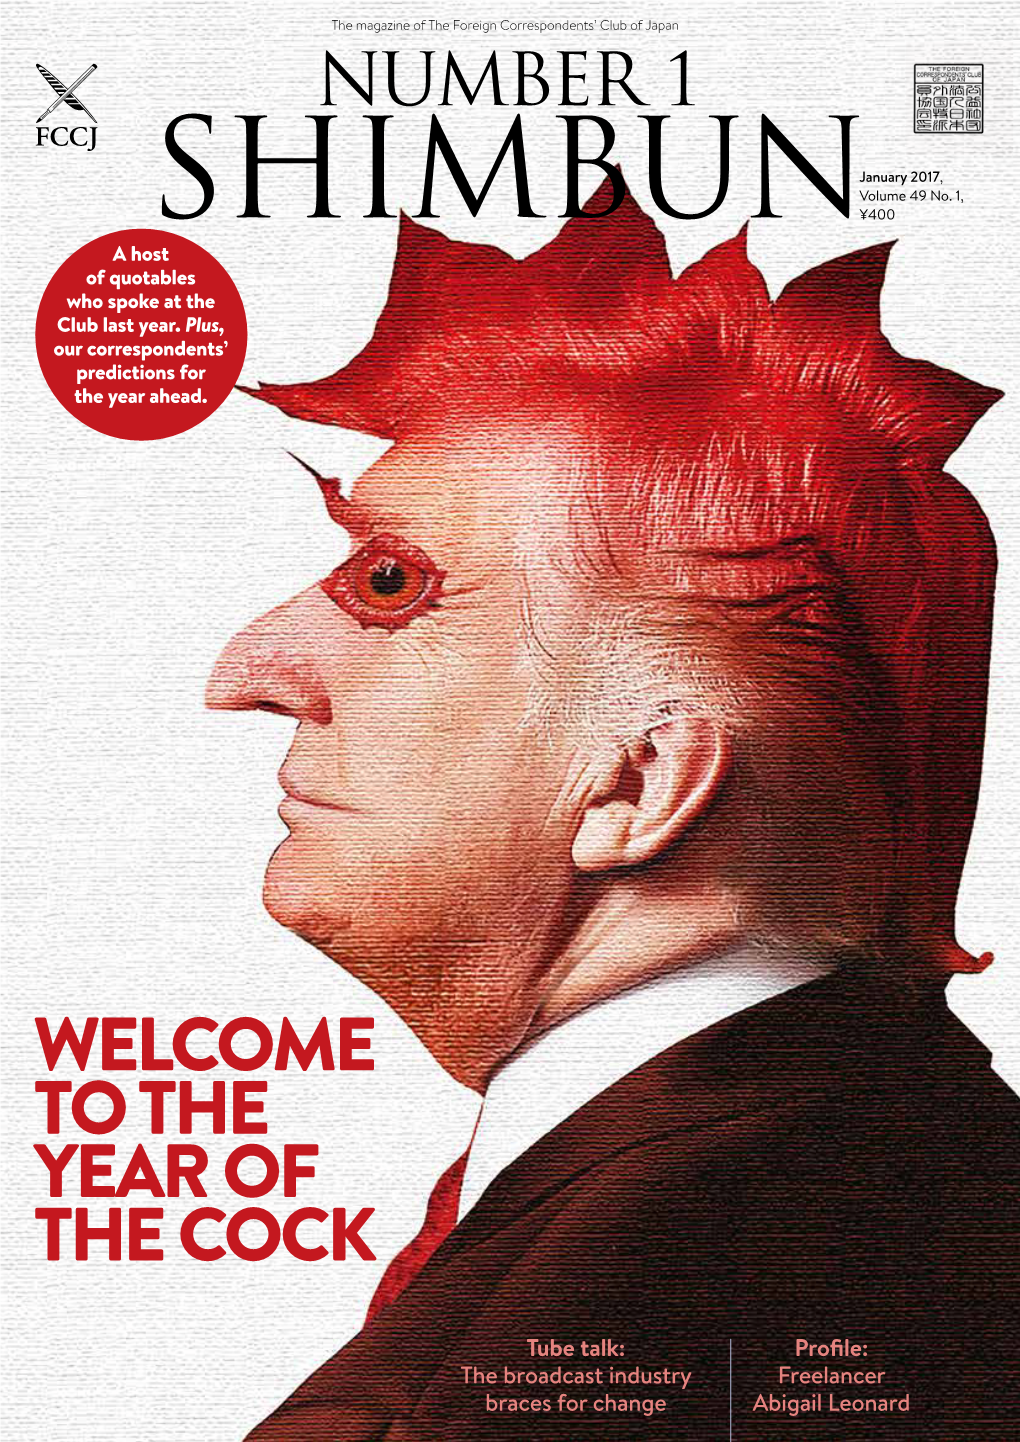 The Year of the Cock